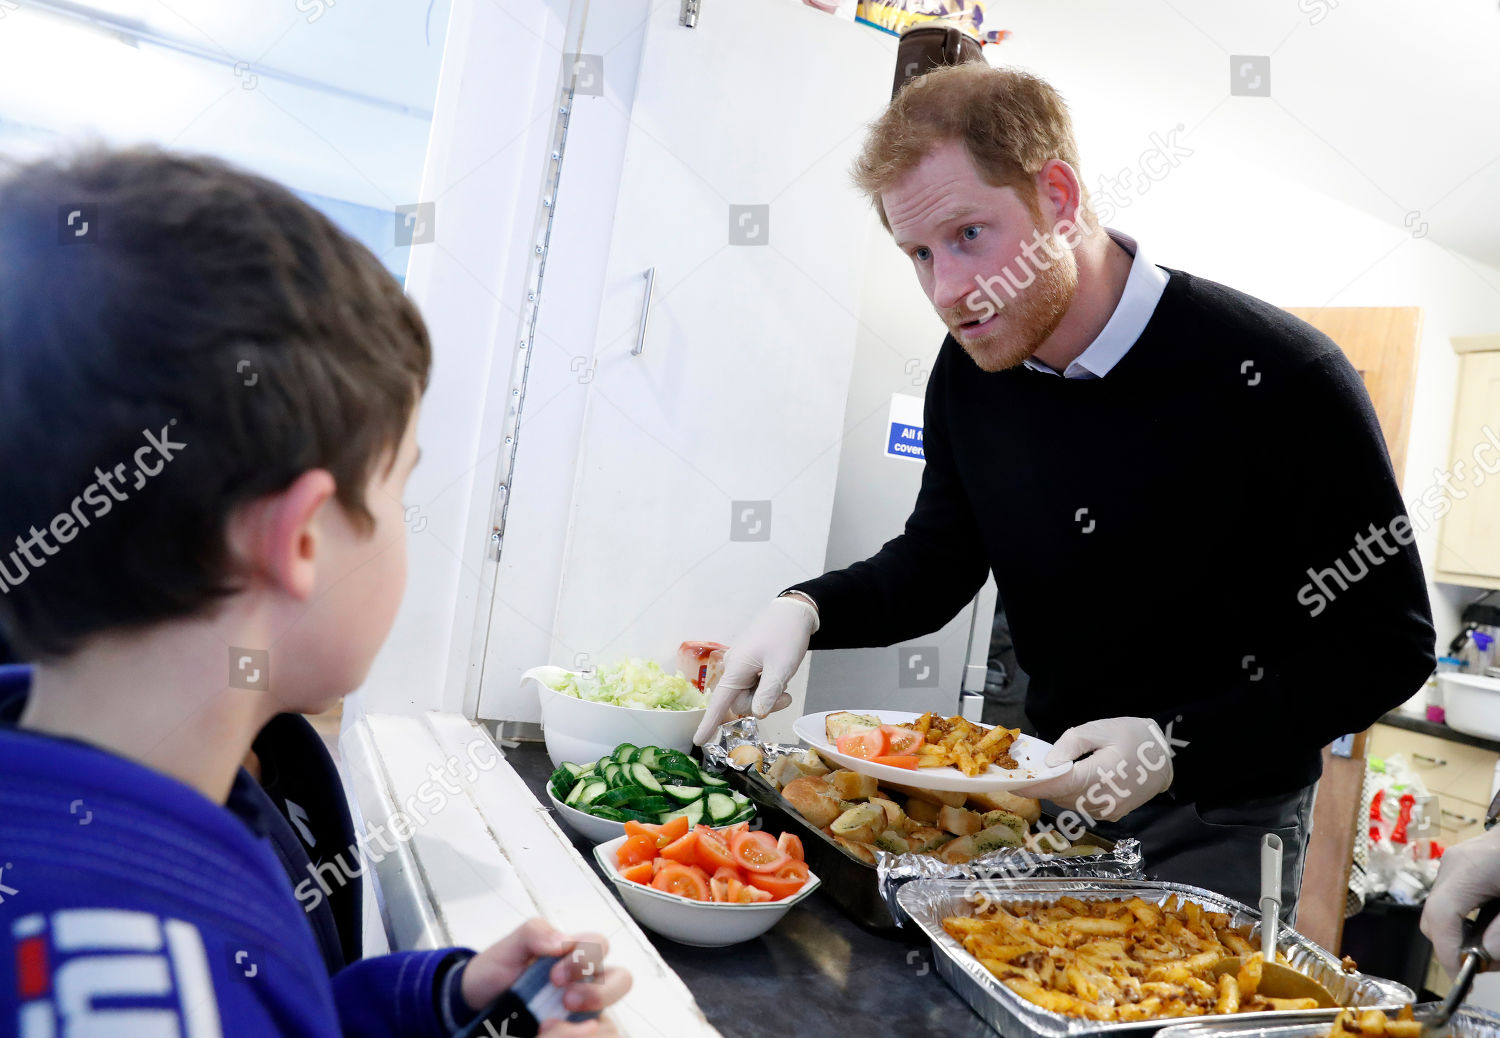 prince-harry-visit-to-fit-and-fed-half-term-initiative-streatham-london-uk-shutterstock-editorial-10110713o.jpg